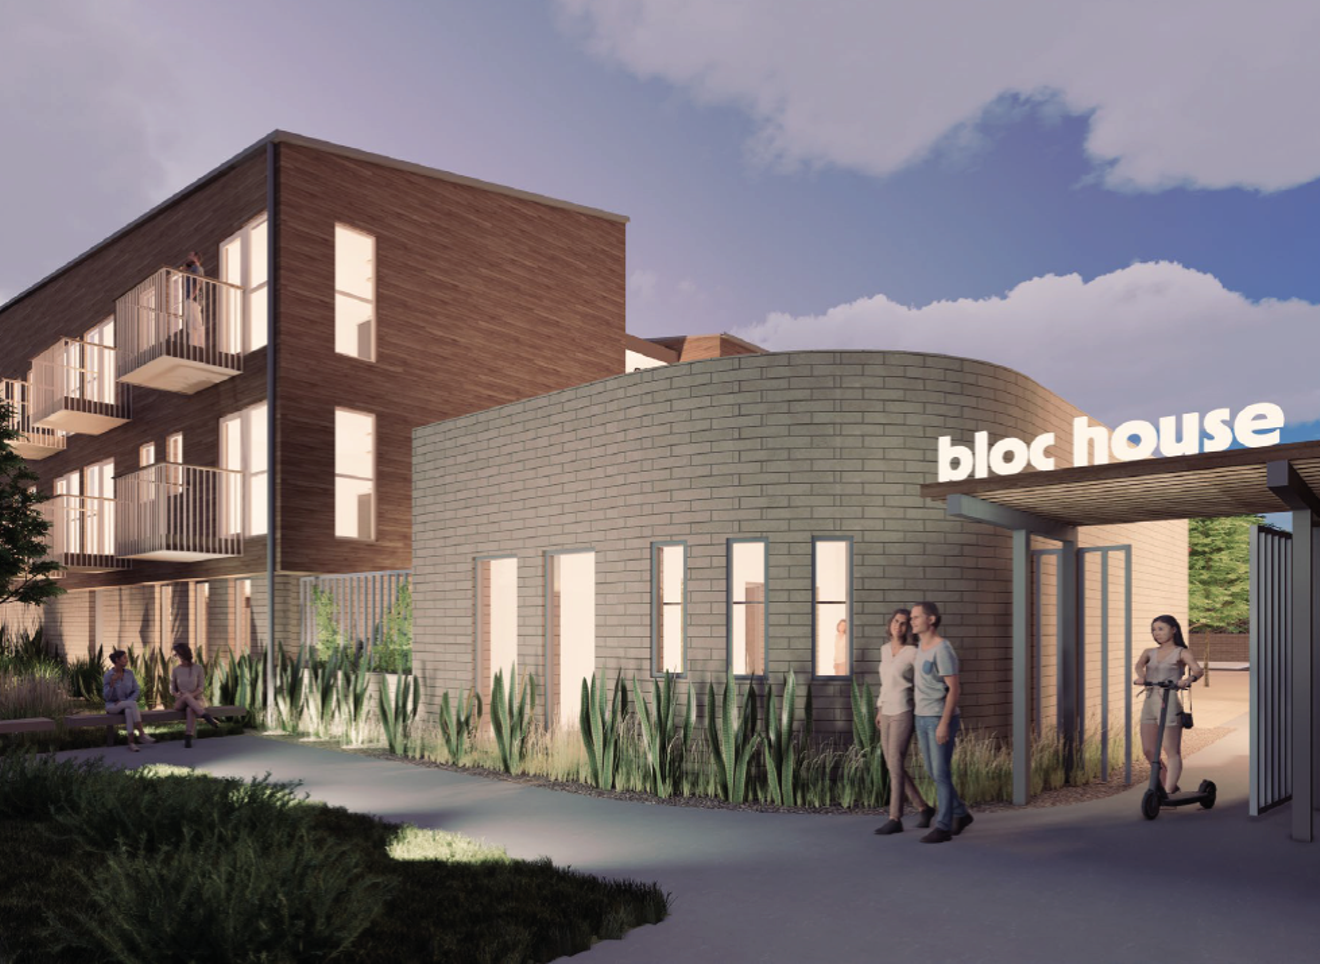 The Santa Fe Trail in East Dallas will host a new micro-apartment complex called the Bloc House that will take more than a year and a half to construct and open.